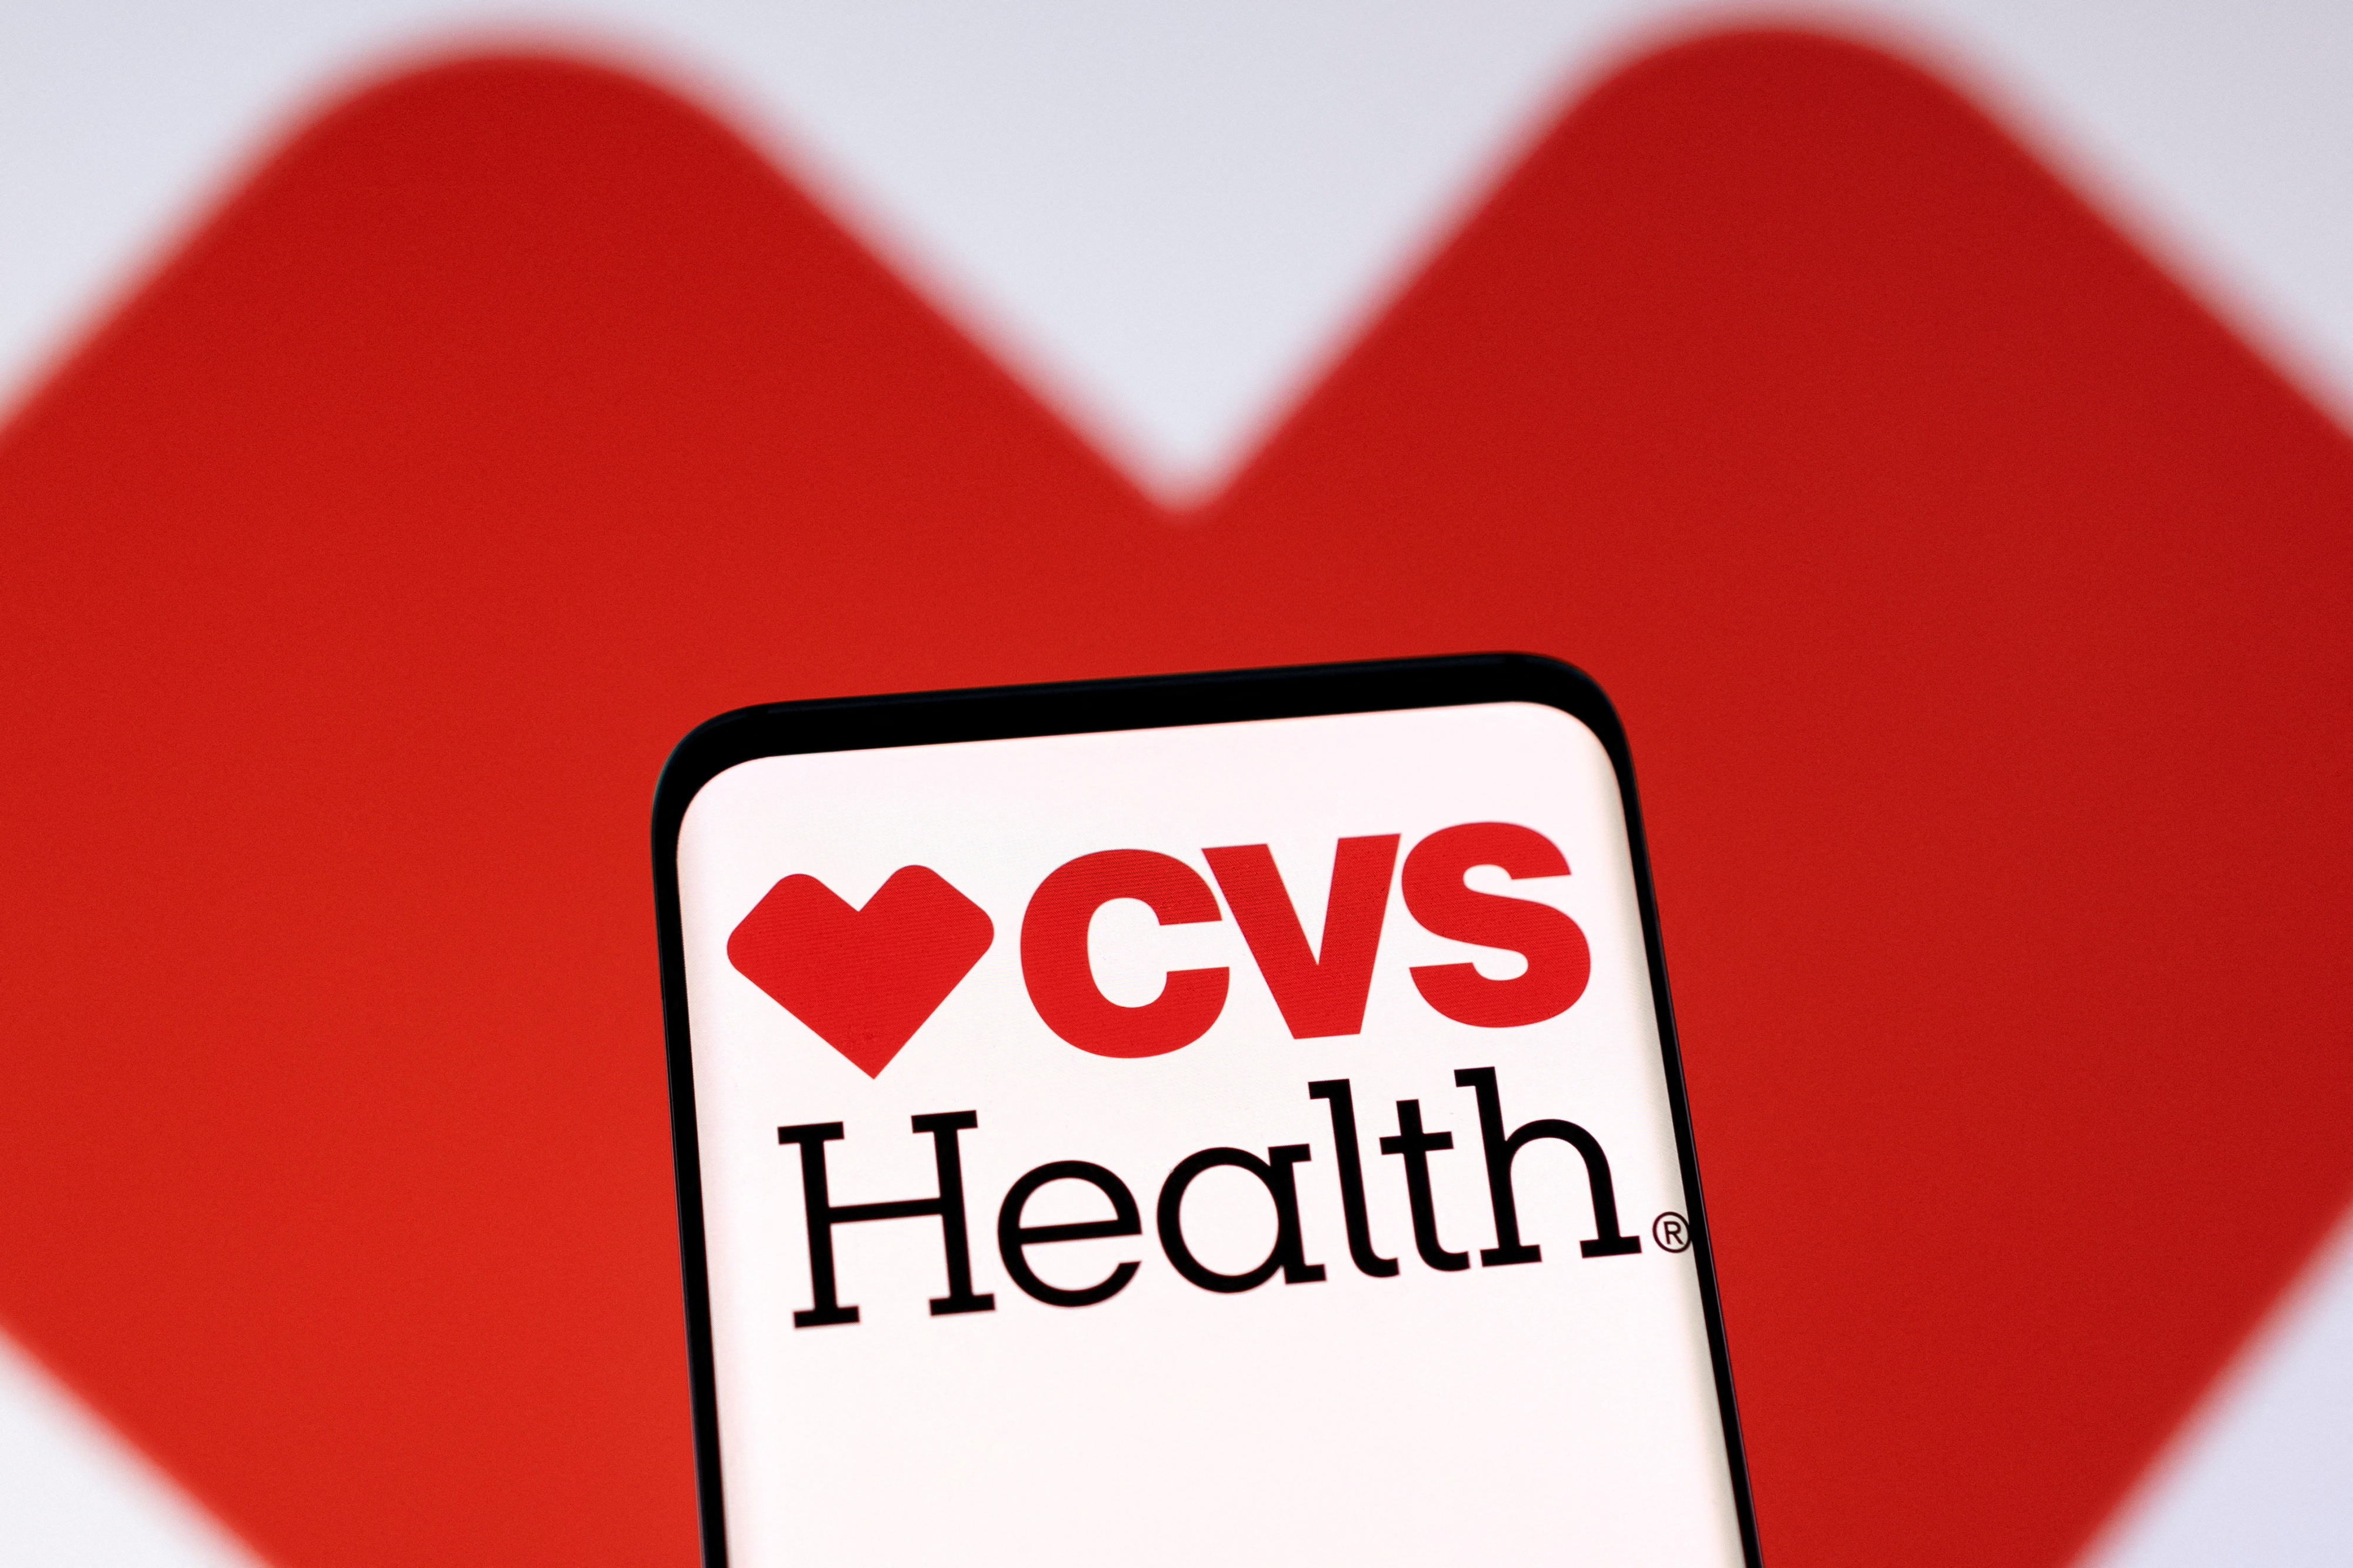 Cvs health is pleased to continue your application providers amerigroup community care providers